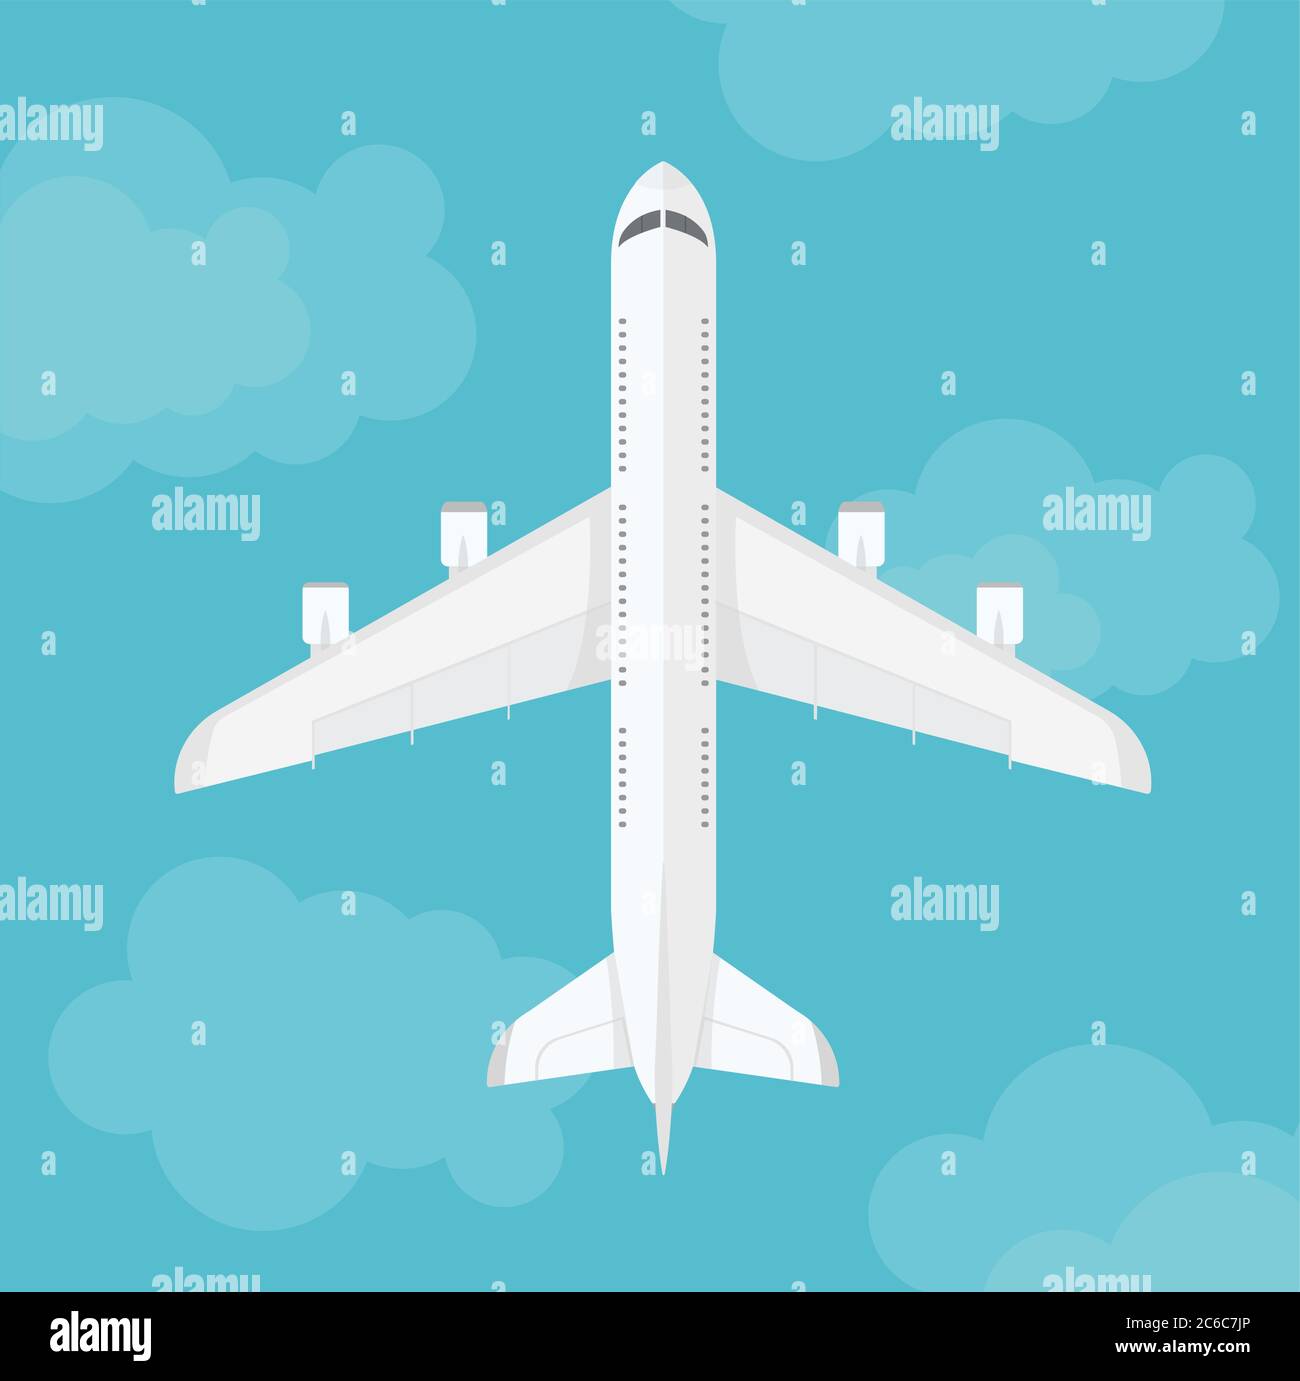 Airplane flying near clouds isolate. Vector illustration Stock Vector